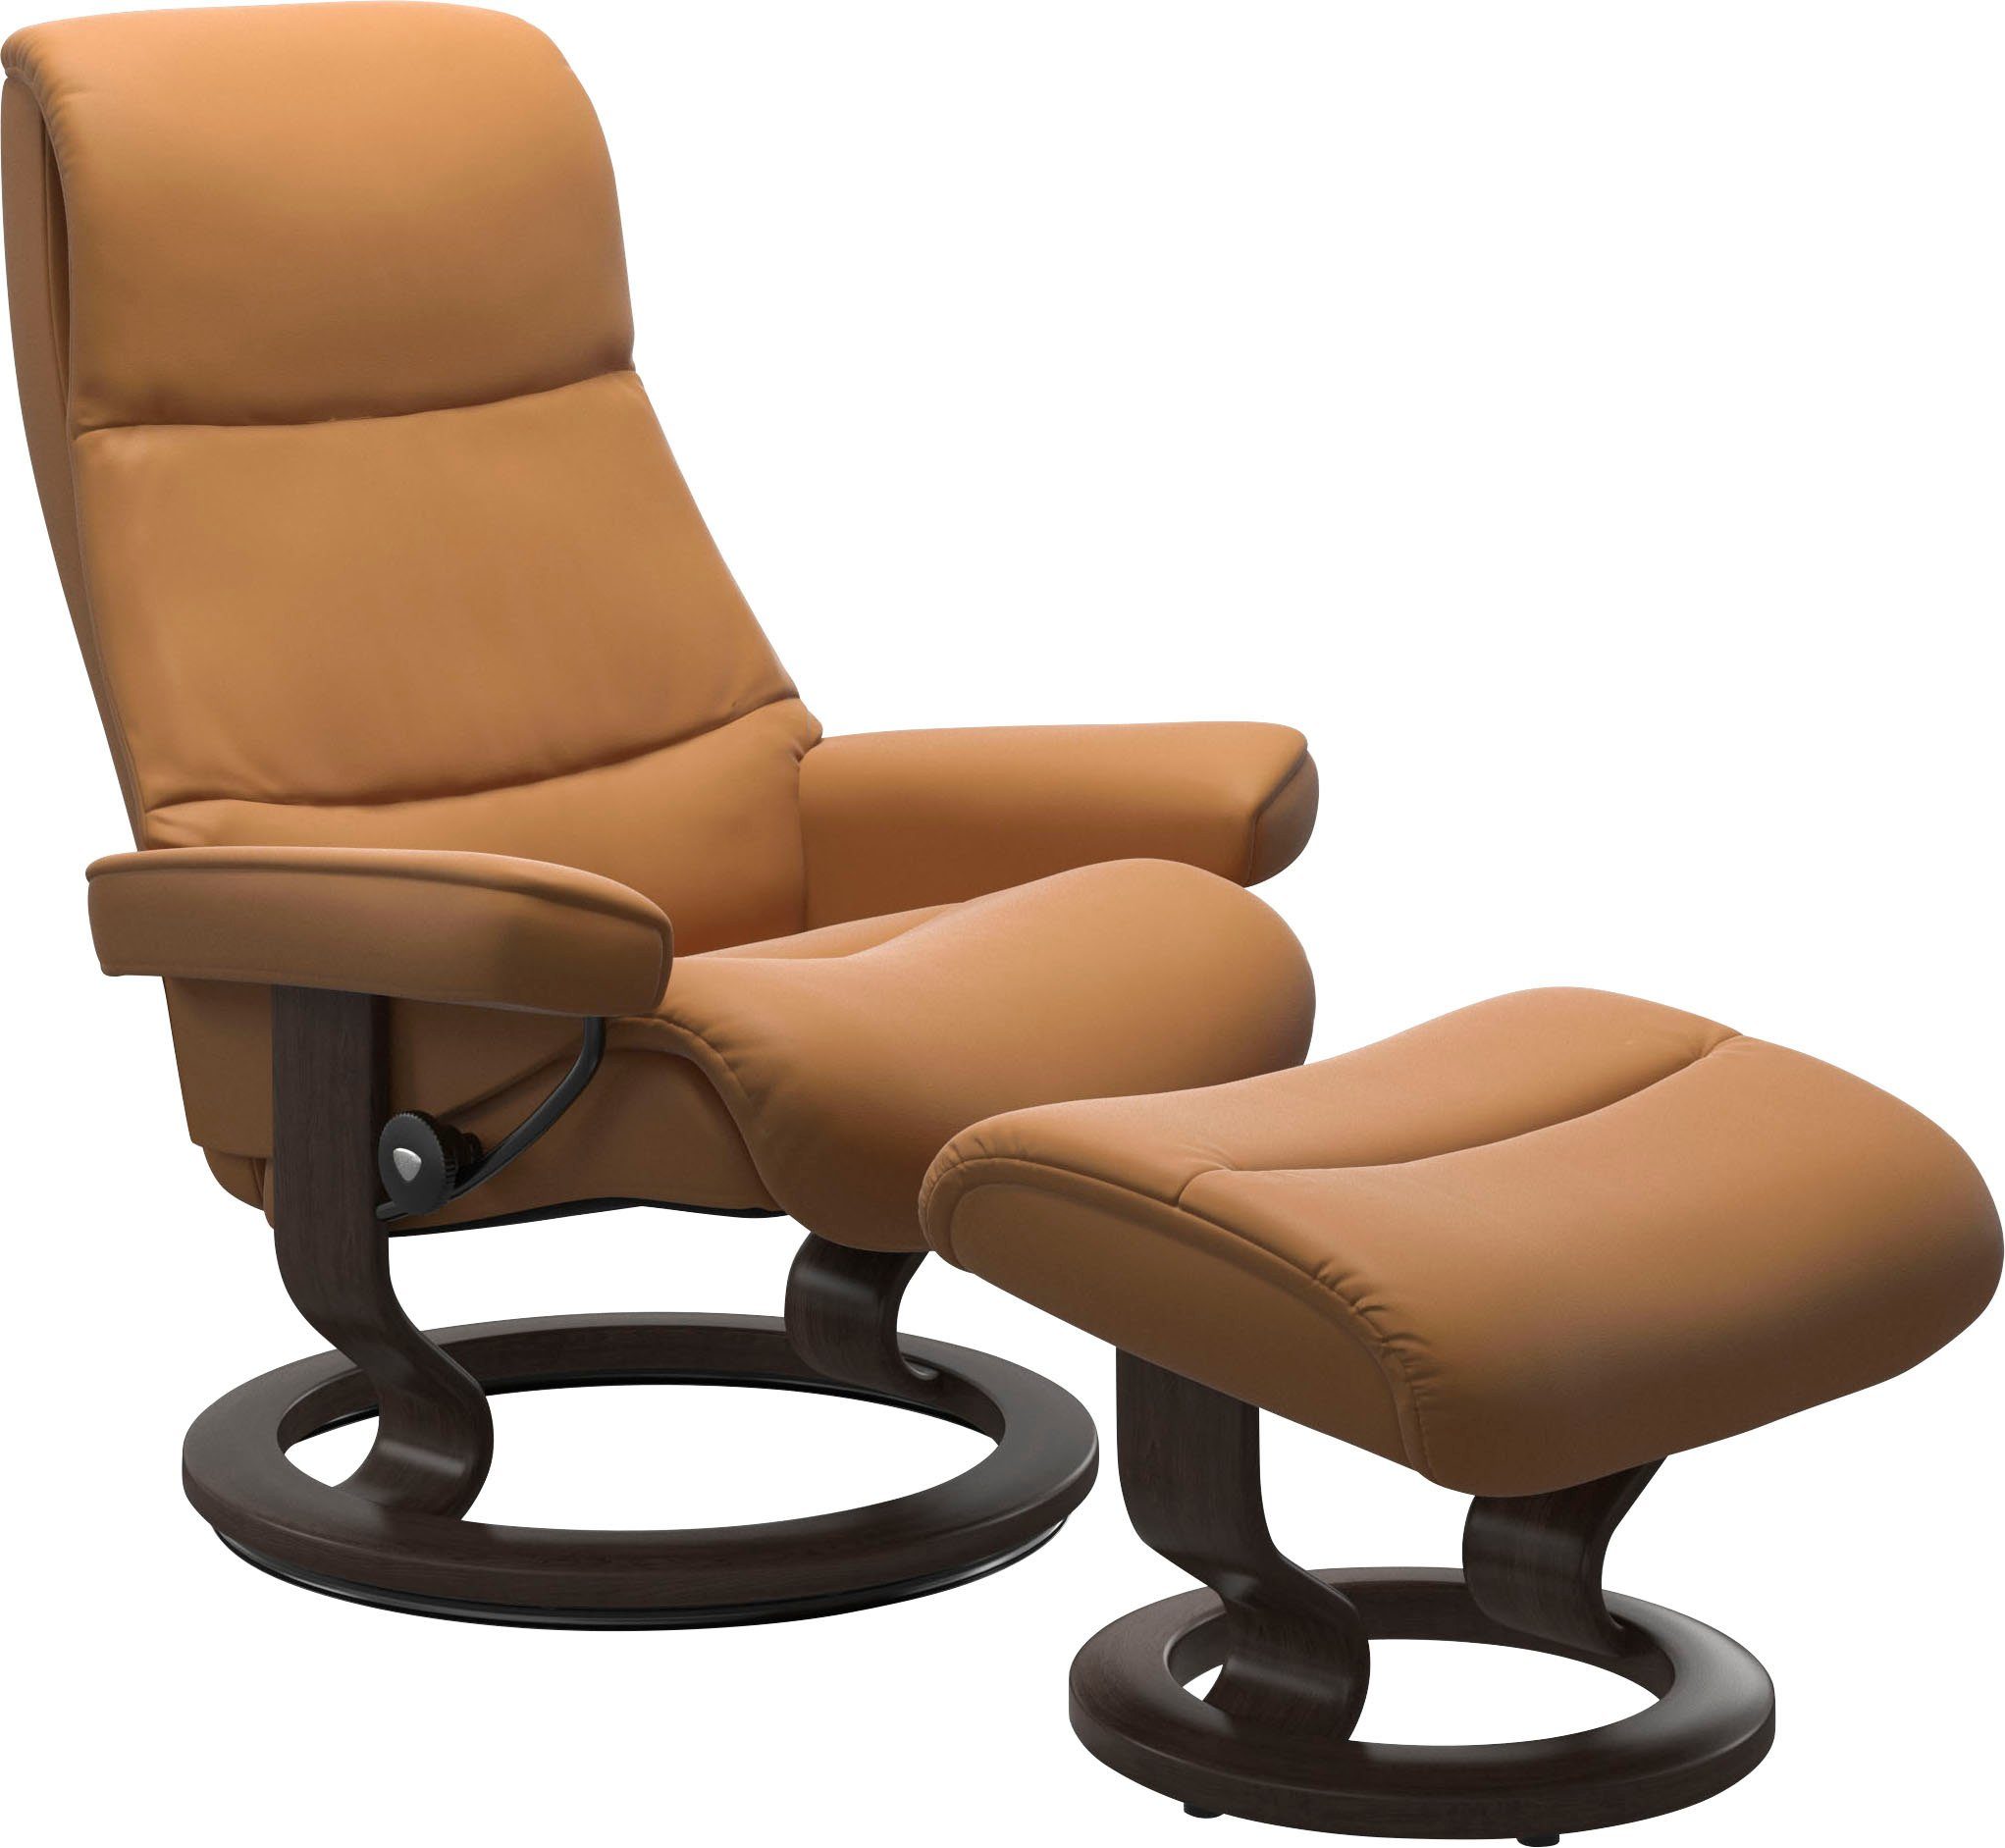 Stressless® Relaxsessel View (Set, Relaxsessel mit Hocker), mit Classic Base, Größe S,Gestell Wenge | Funktionssessel